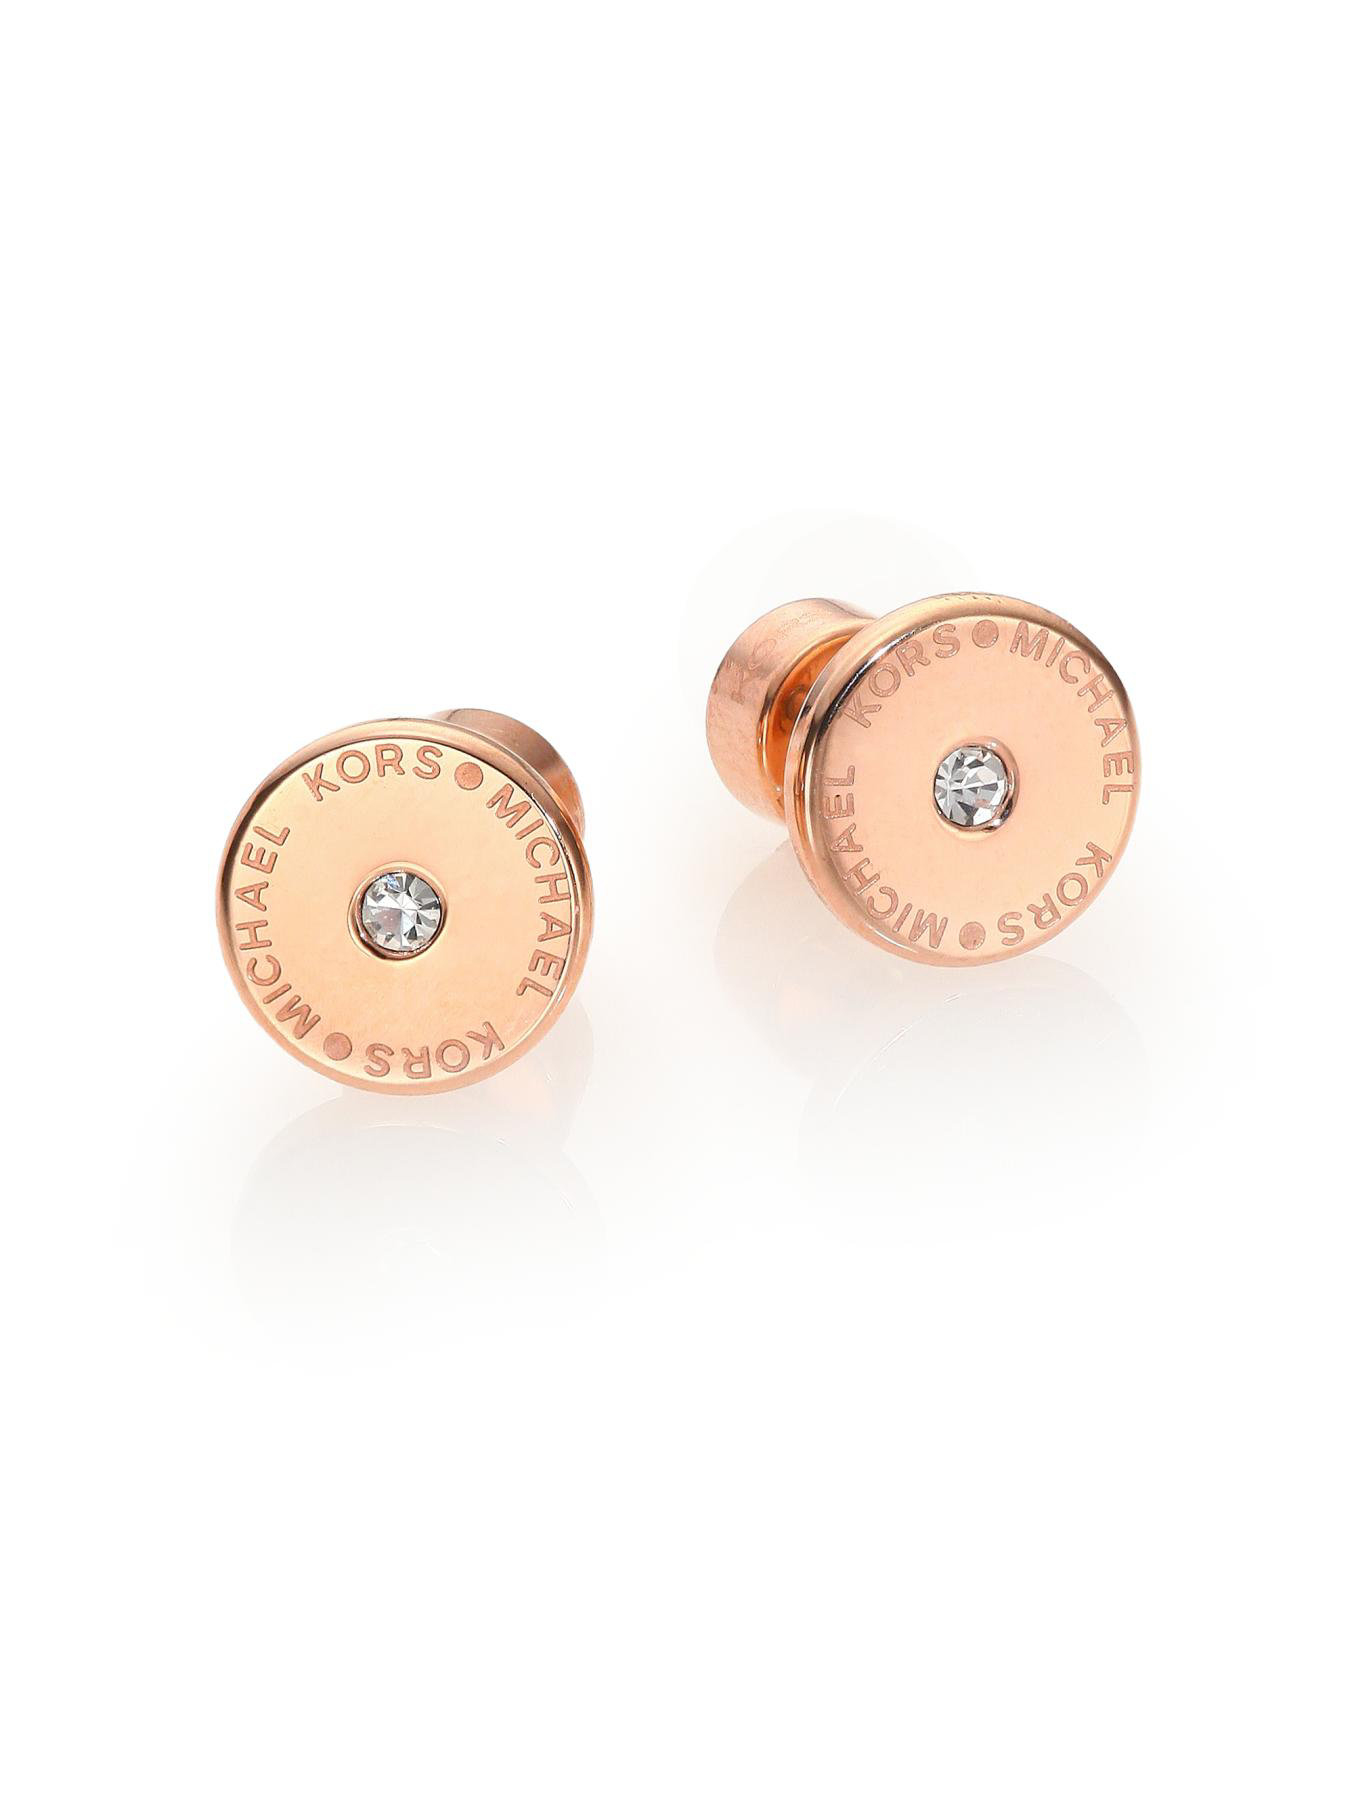 MICHAEL KORS Michael Kors Rose Gold Love Pave and Mother of Pearl Heart  Earrings  JEWELLERY from Adams Jewellers Limited UK